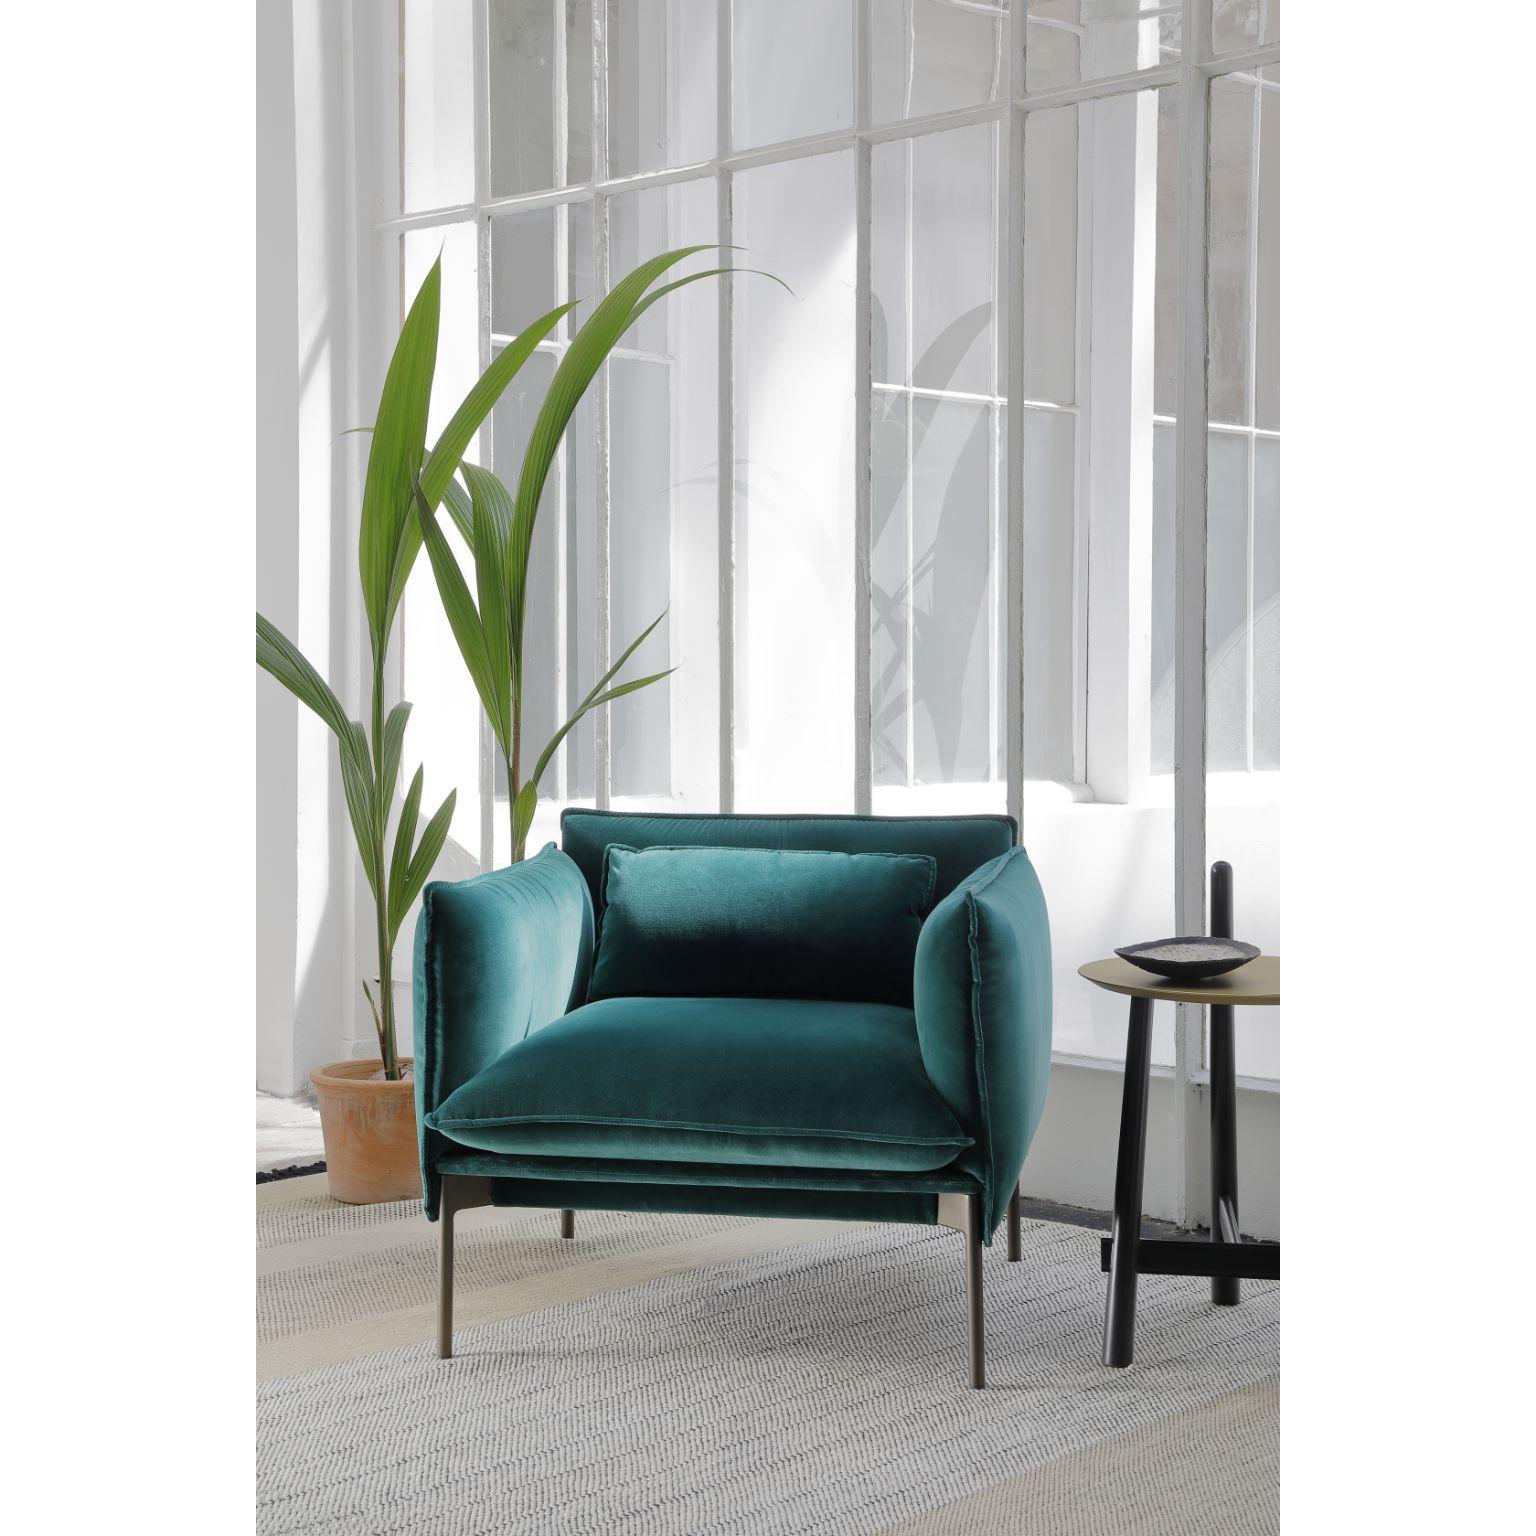 Palmspring armchair by Anderssen & Voll
2020
Materials: Bronze lacquered metal structure, seat and back in polyurethane foam, upholstered
in fabric
Dimensions: 89 x 83 x 69 cm
 seat: 40 cm

3-seater sofa in polyurethane foam of different